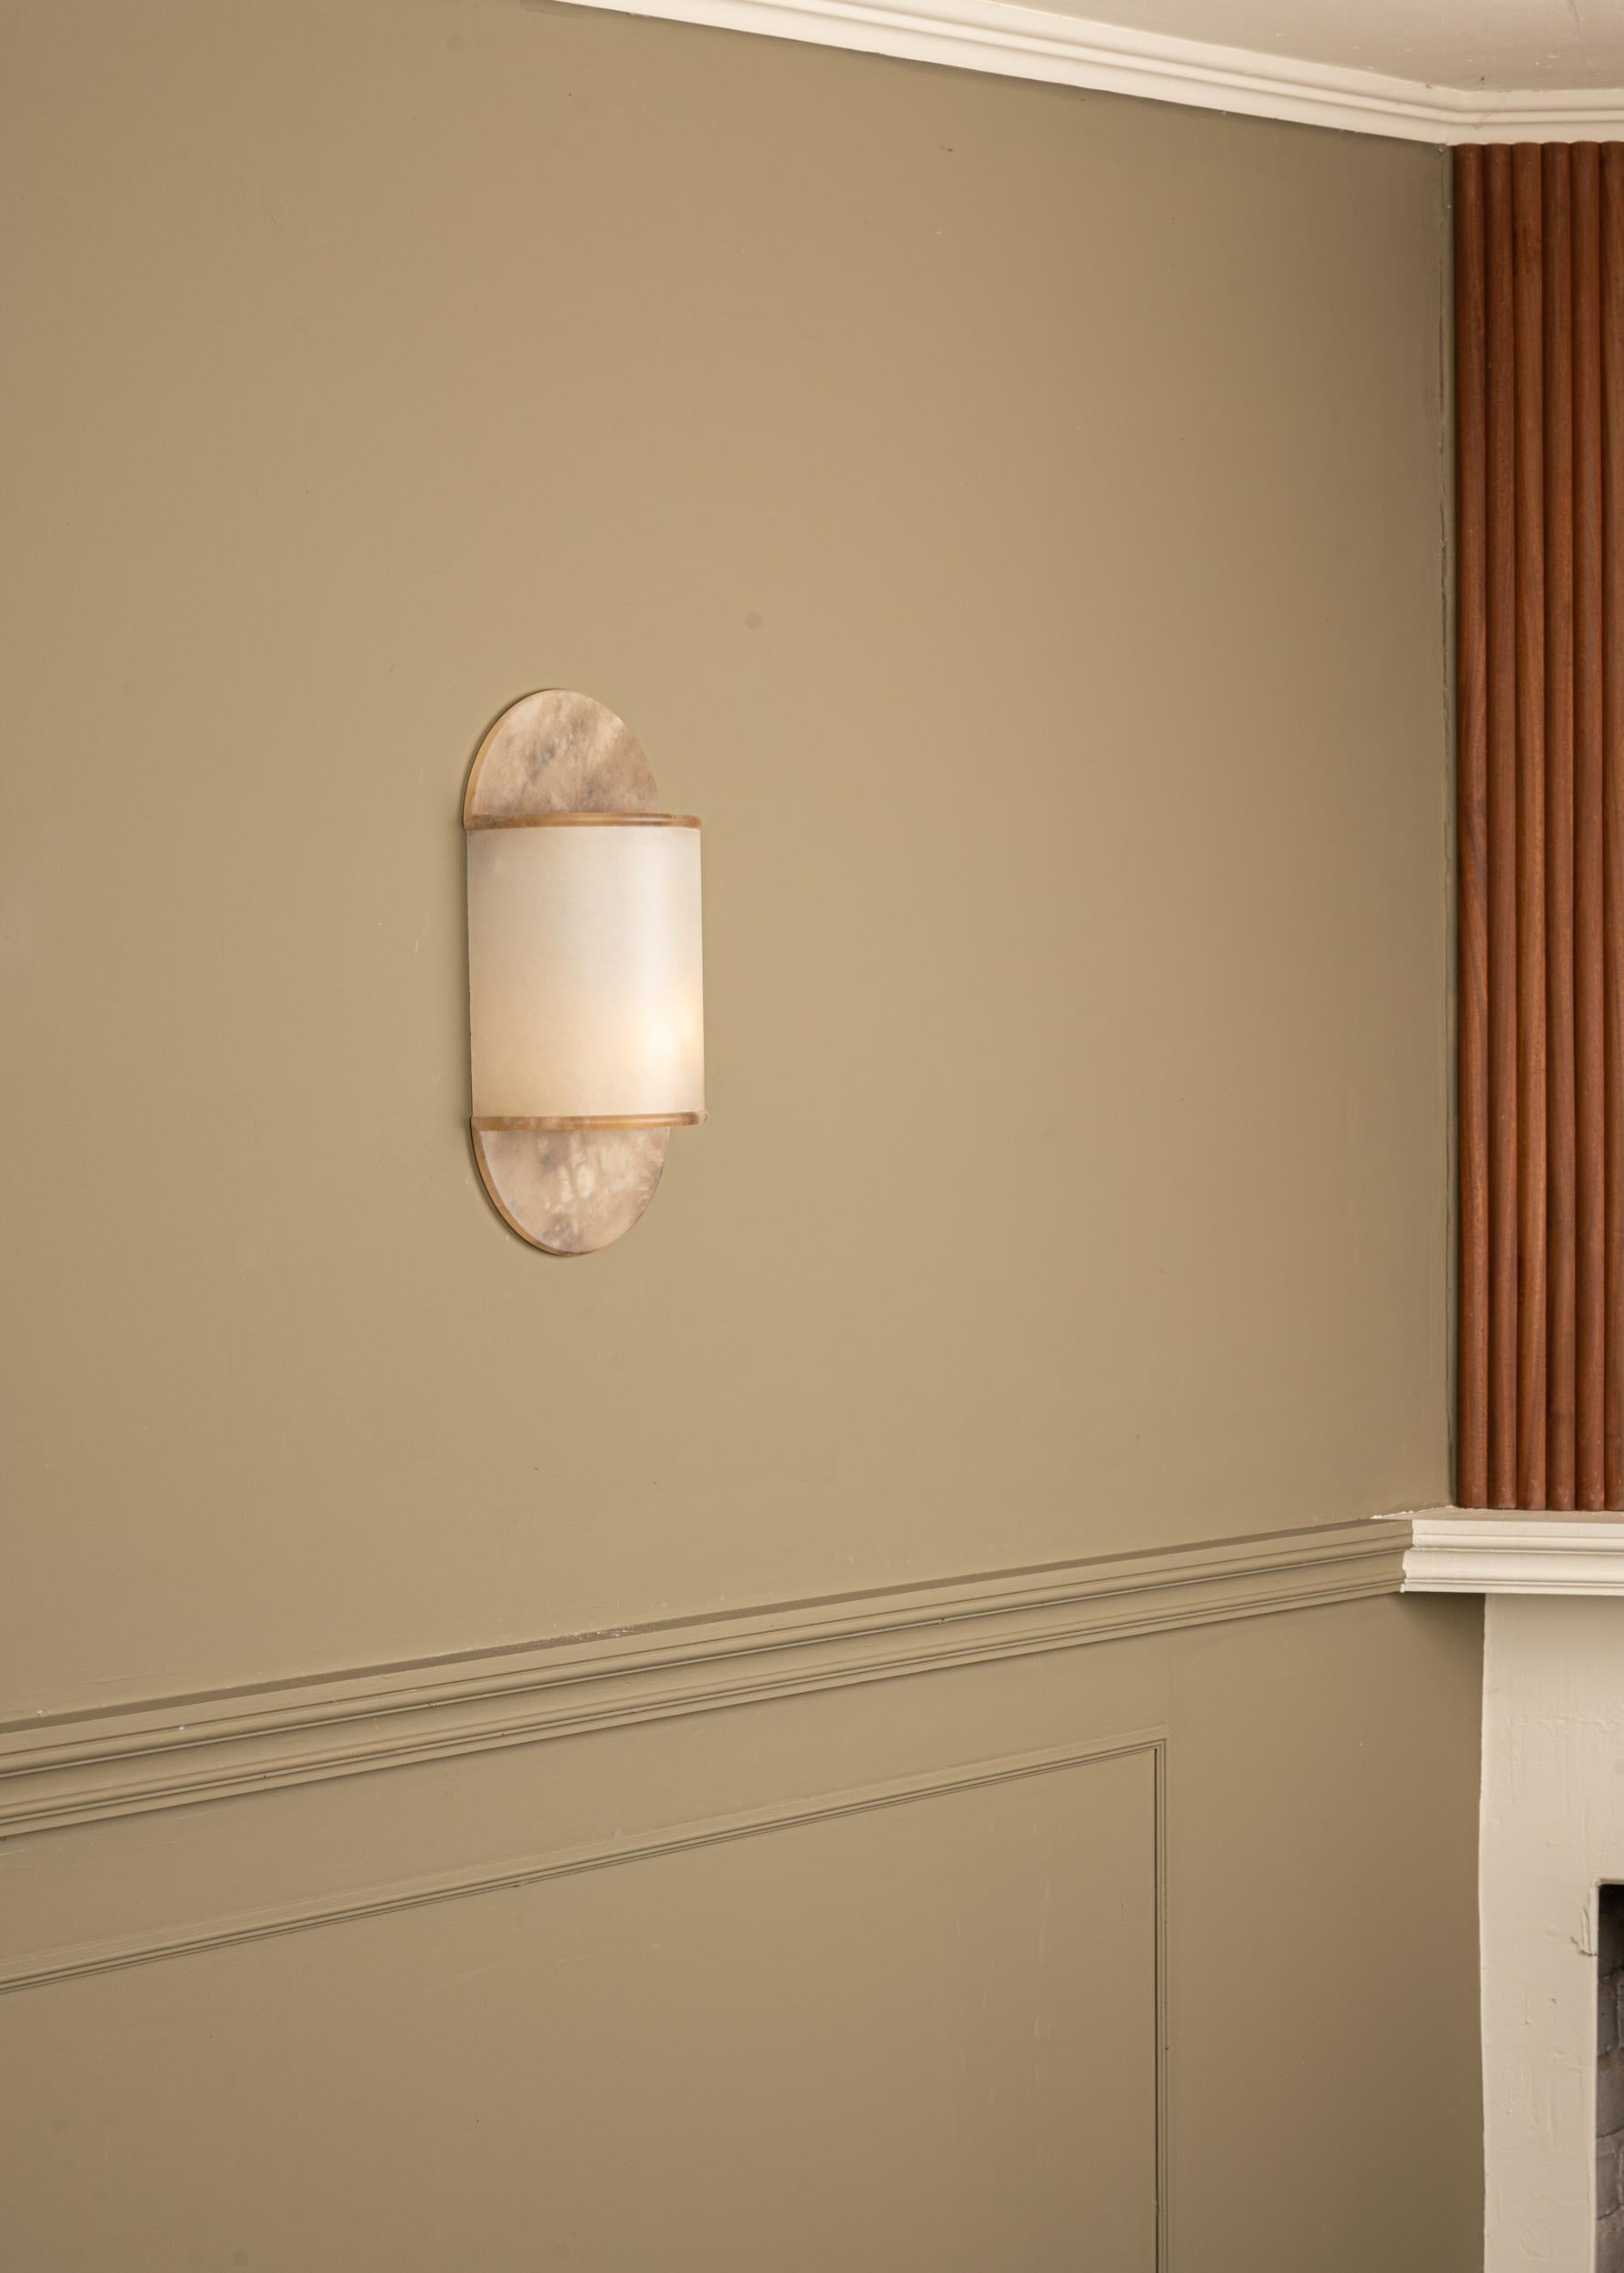 Pilolo Tobacco Alabaster Wall Sconce by Simone & Marcel
Dimensions: D 11 x W 22 x H 42 cm.
Materials: Alabaster.

Available in different brass and alabaster options and finishes. Custom options available on request. Please contact us. 

All our